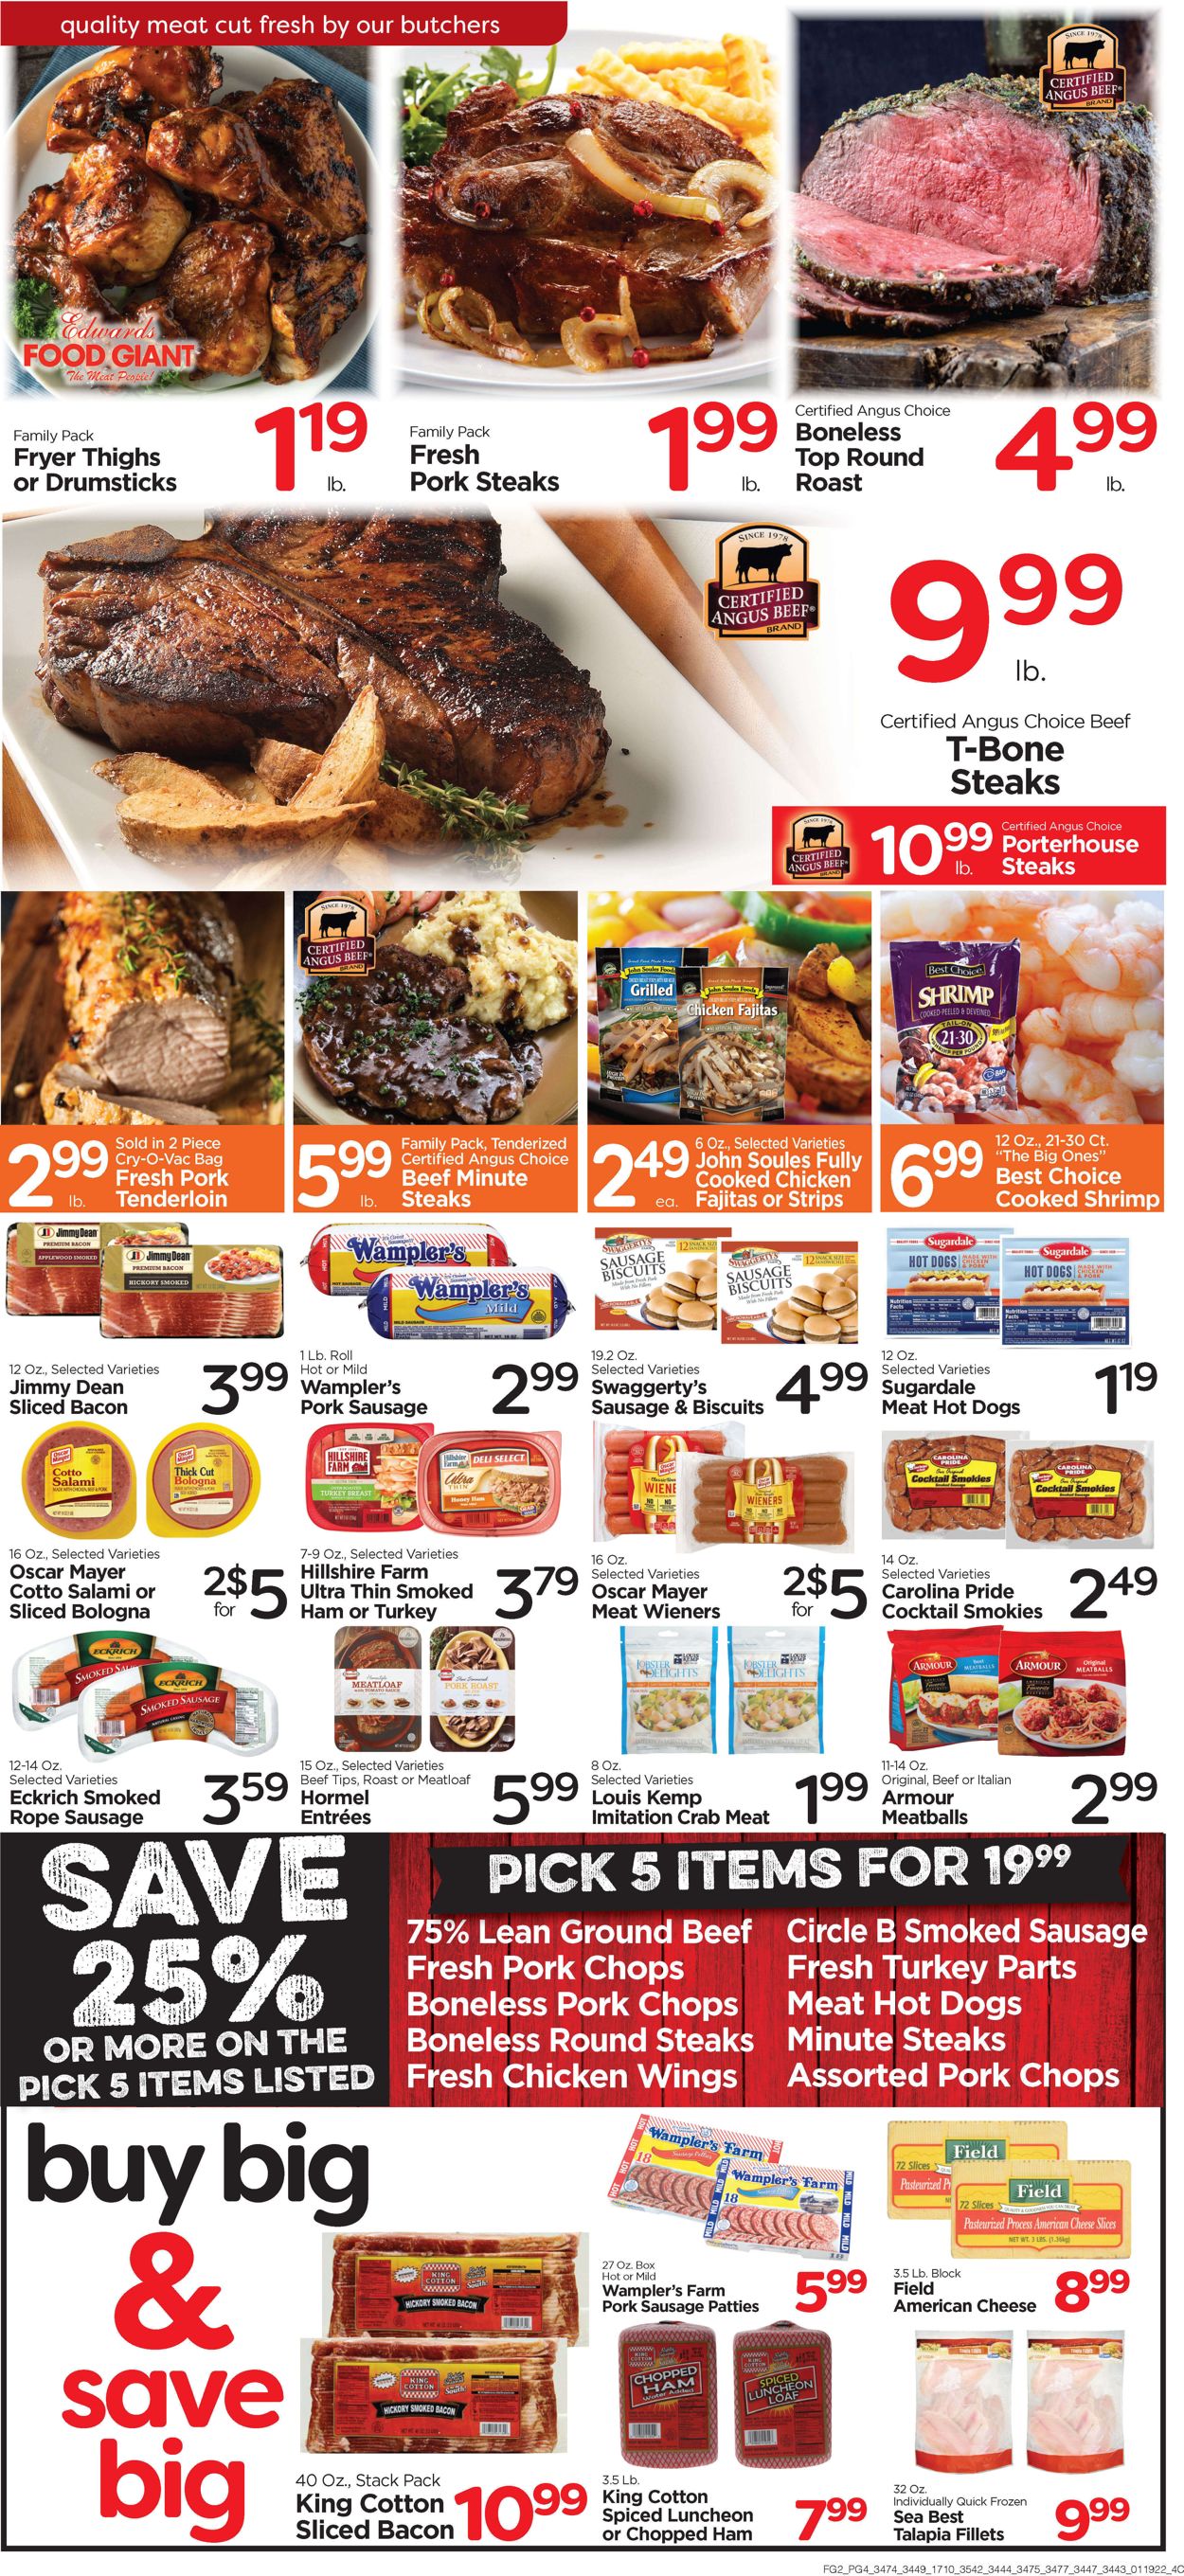 Catalogue Edwards Food Giant from 01/19/2022